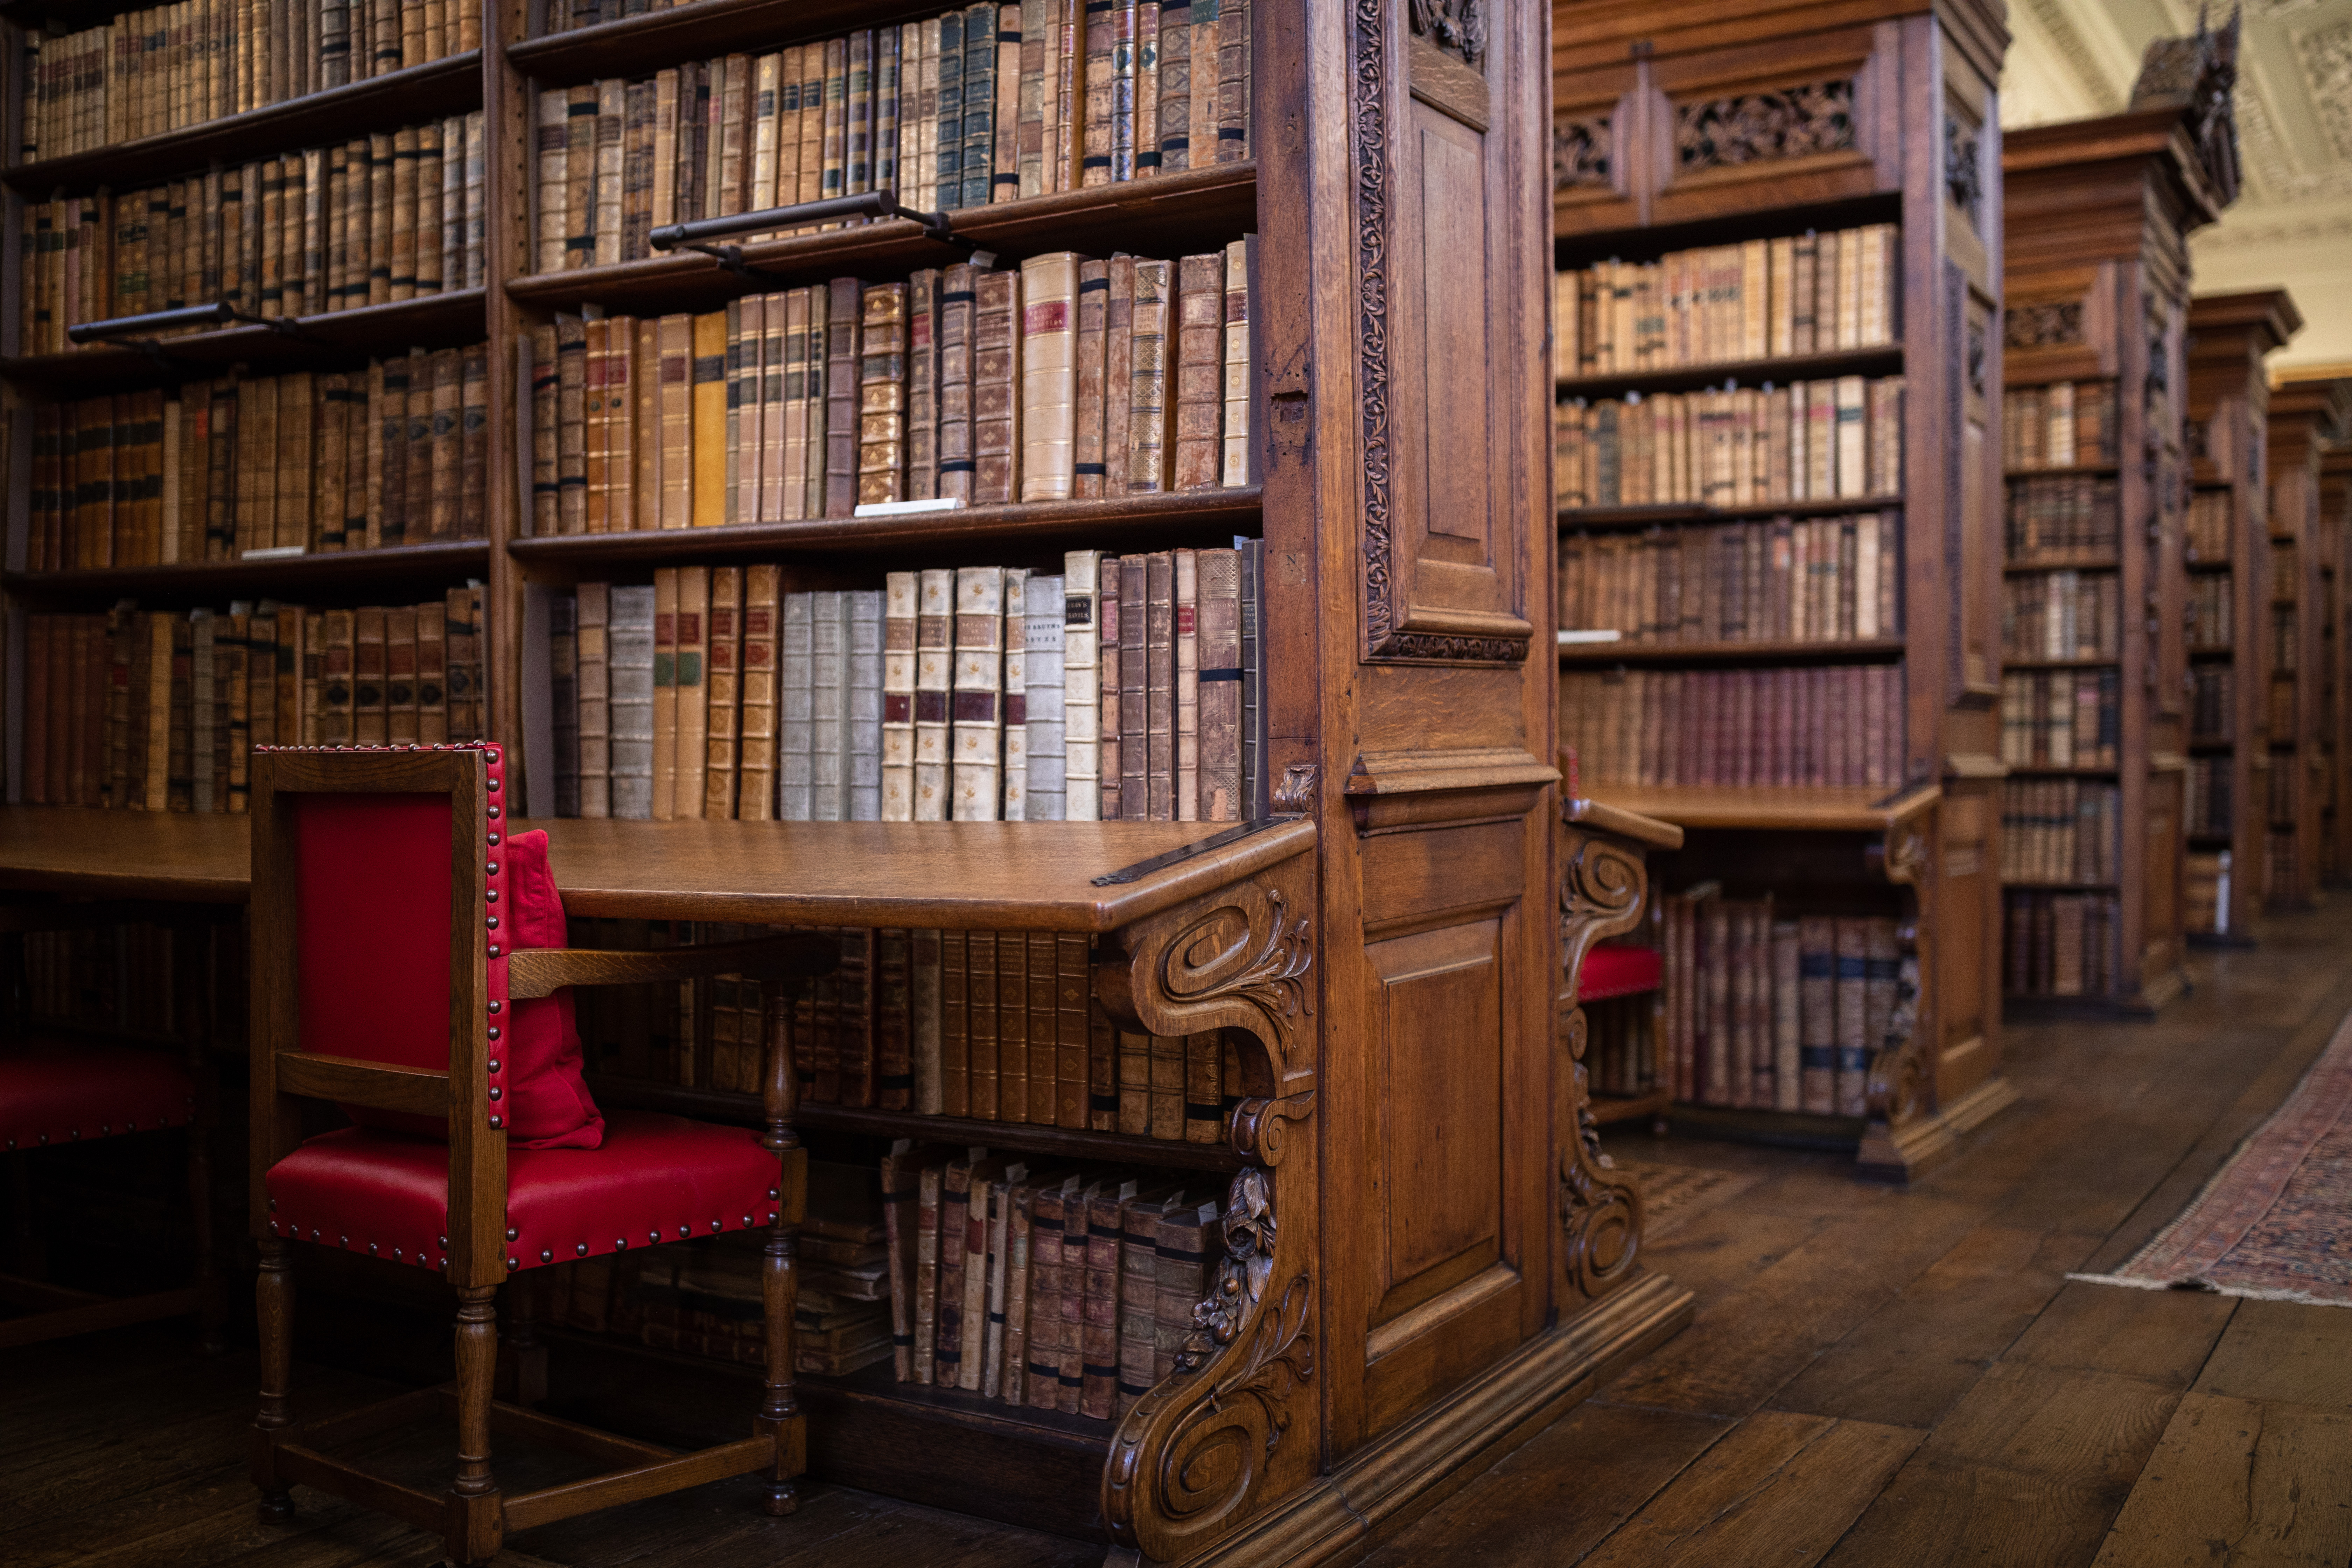 the Upper Library bookcases